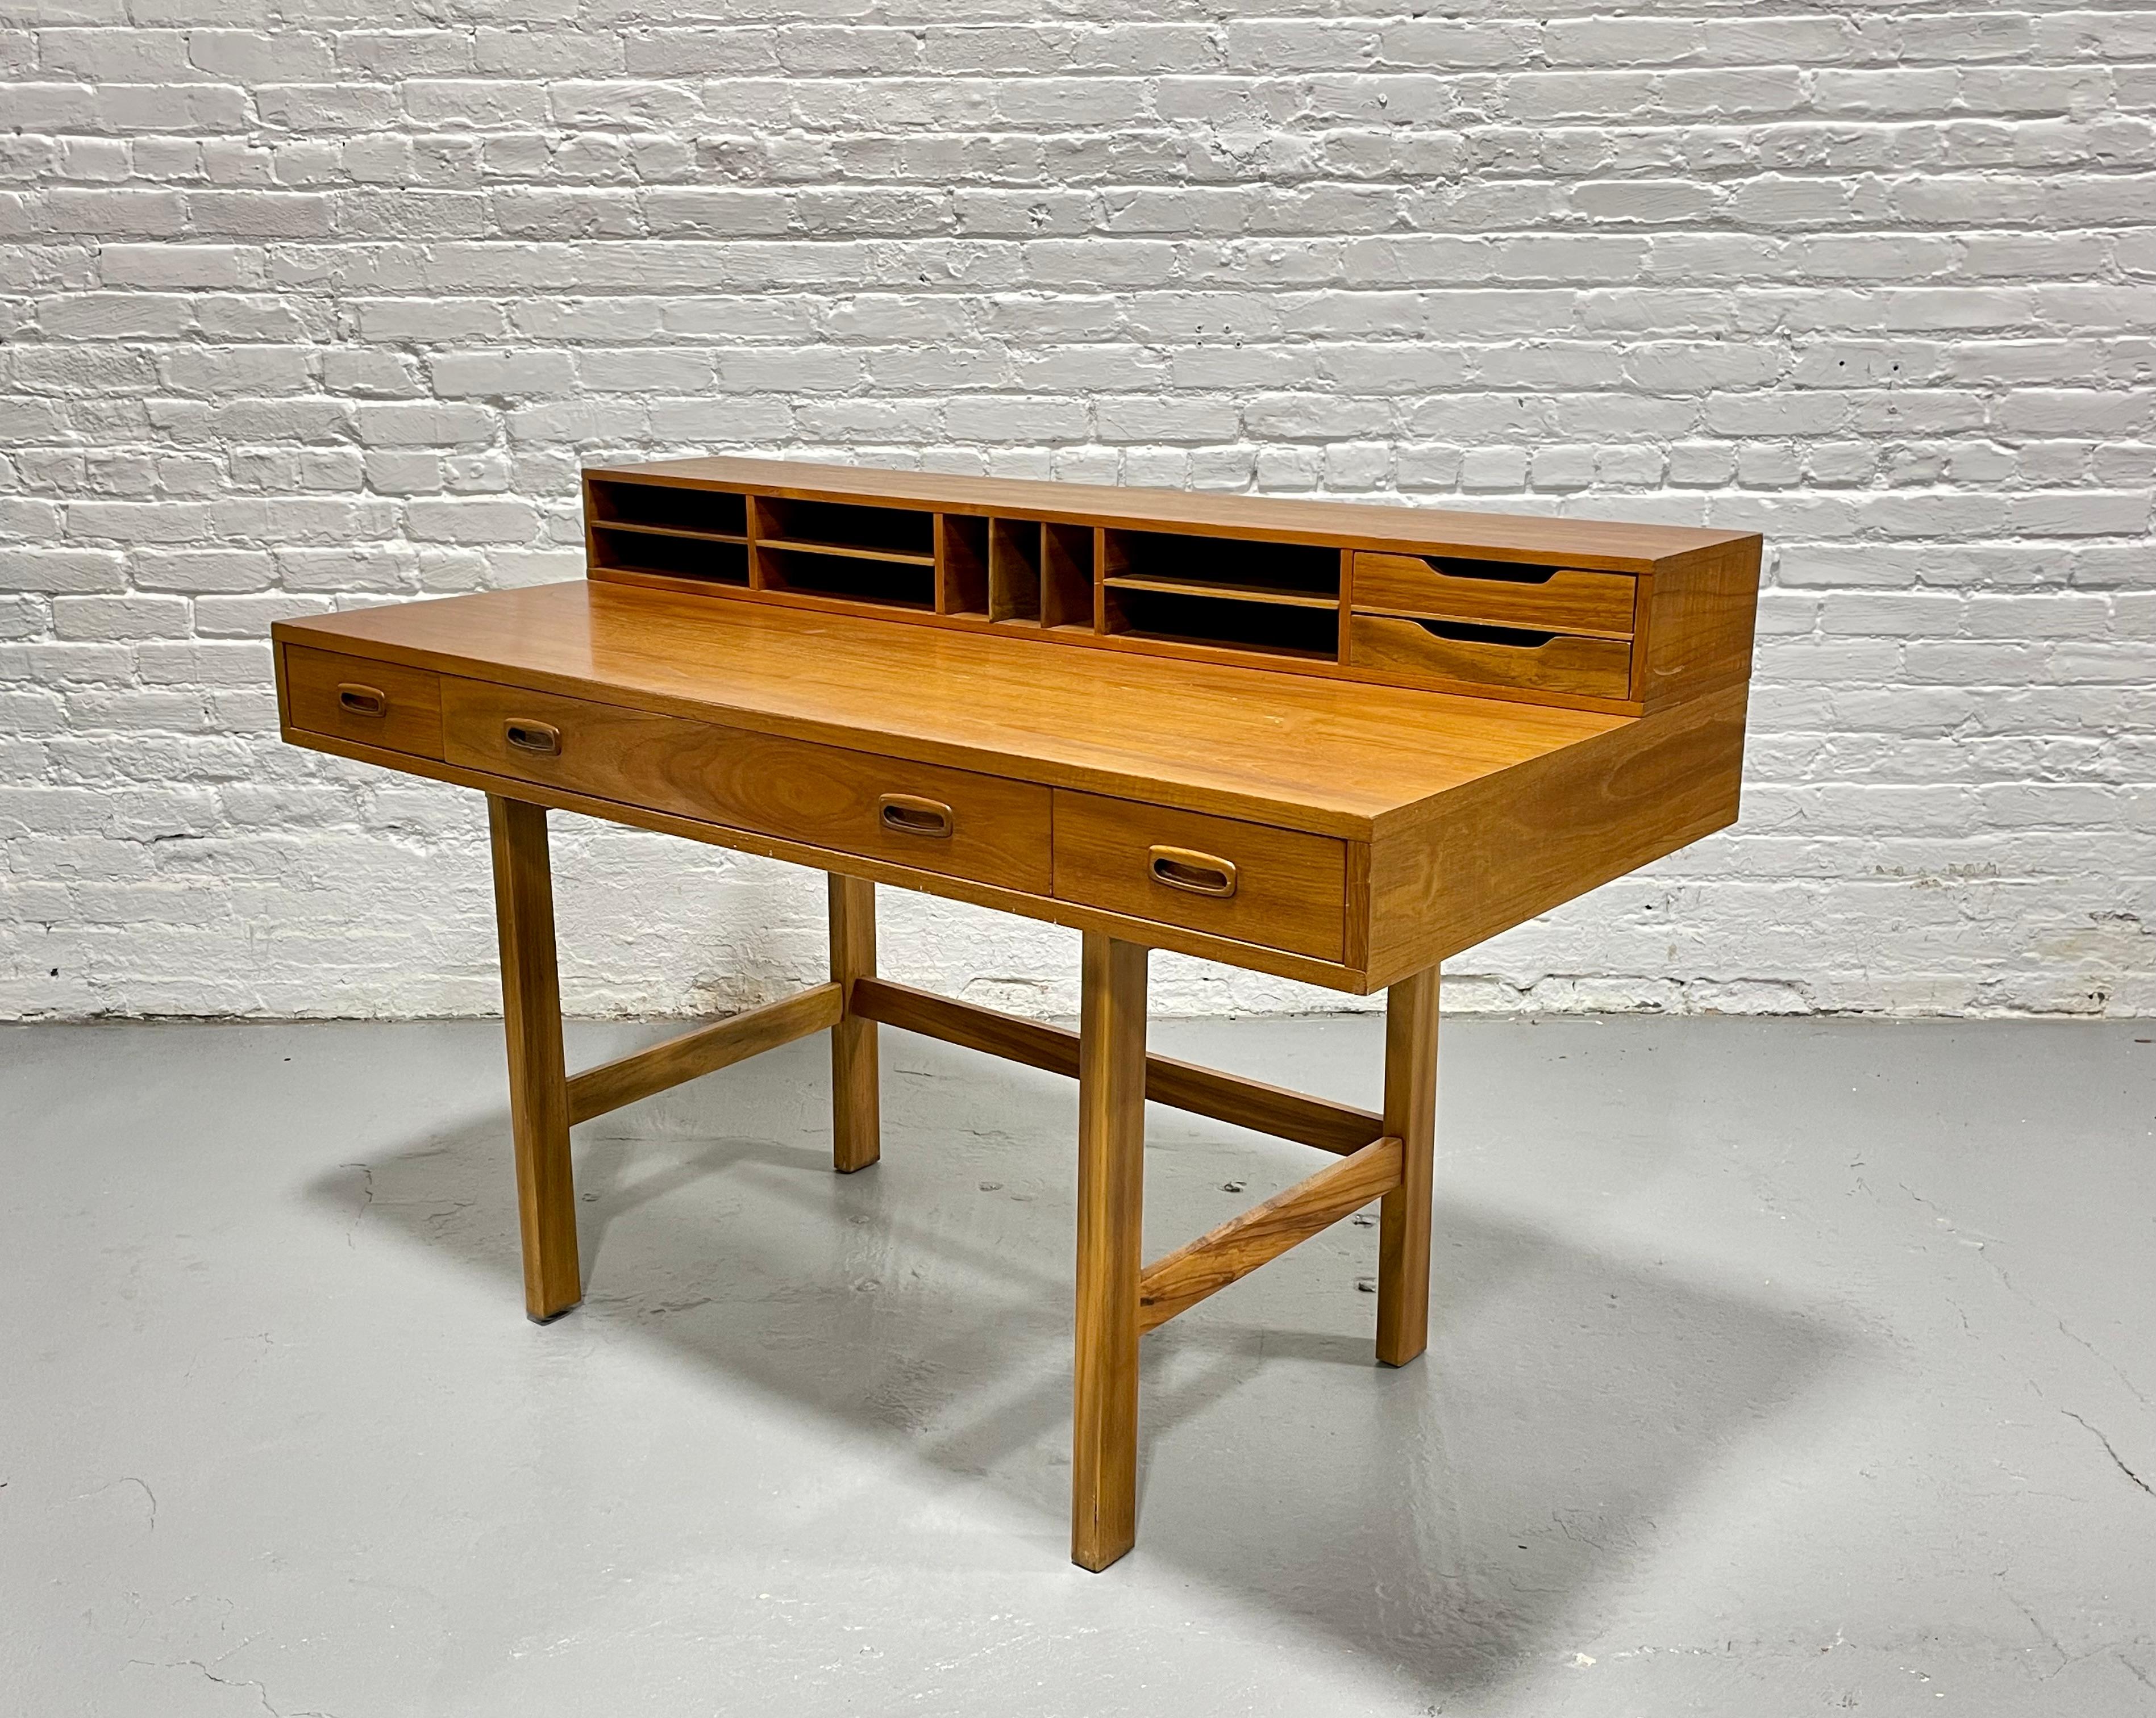 Mid Century Modern Teak Desk by Scova for Dixie, in the style of Peter Lovig, circa 1960s. This beauty offers three drawers along the front and plenty of cubbies for all your office supplies. Best of all, the cubby area flips back to allow for a